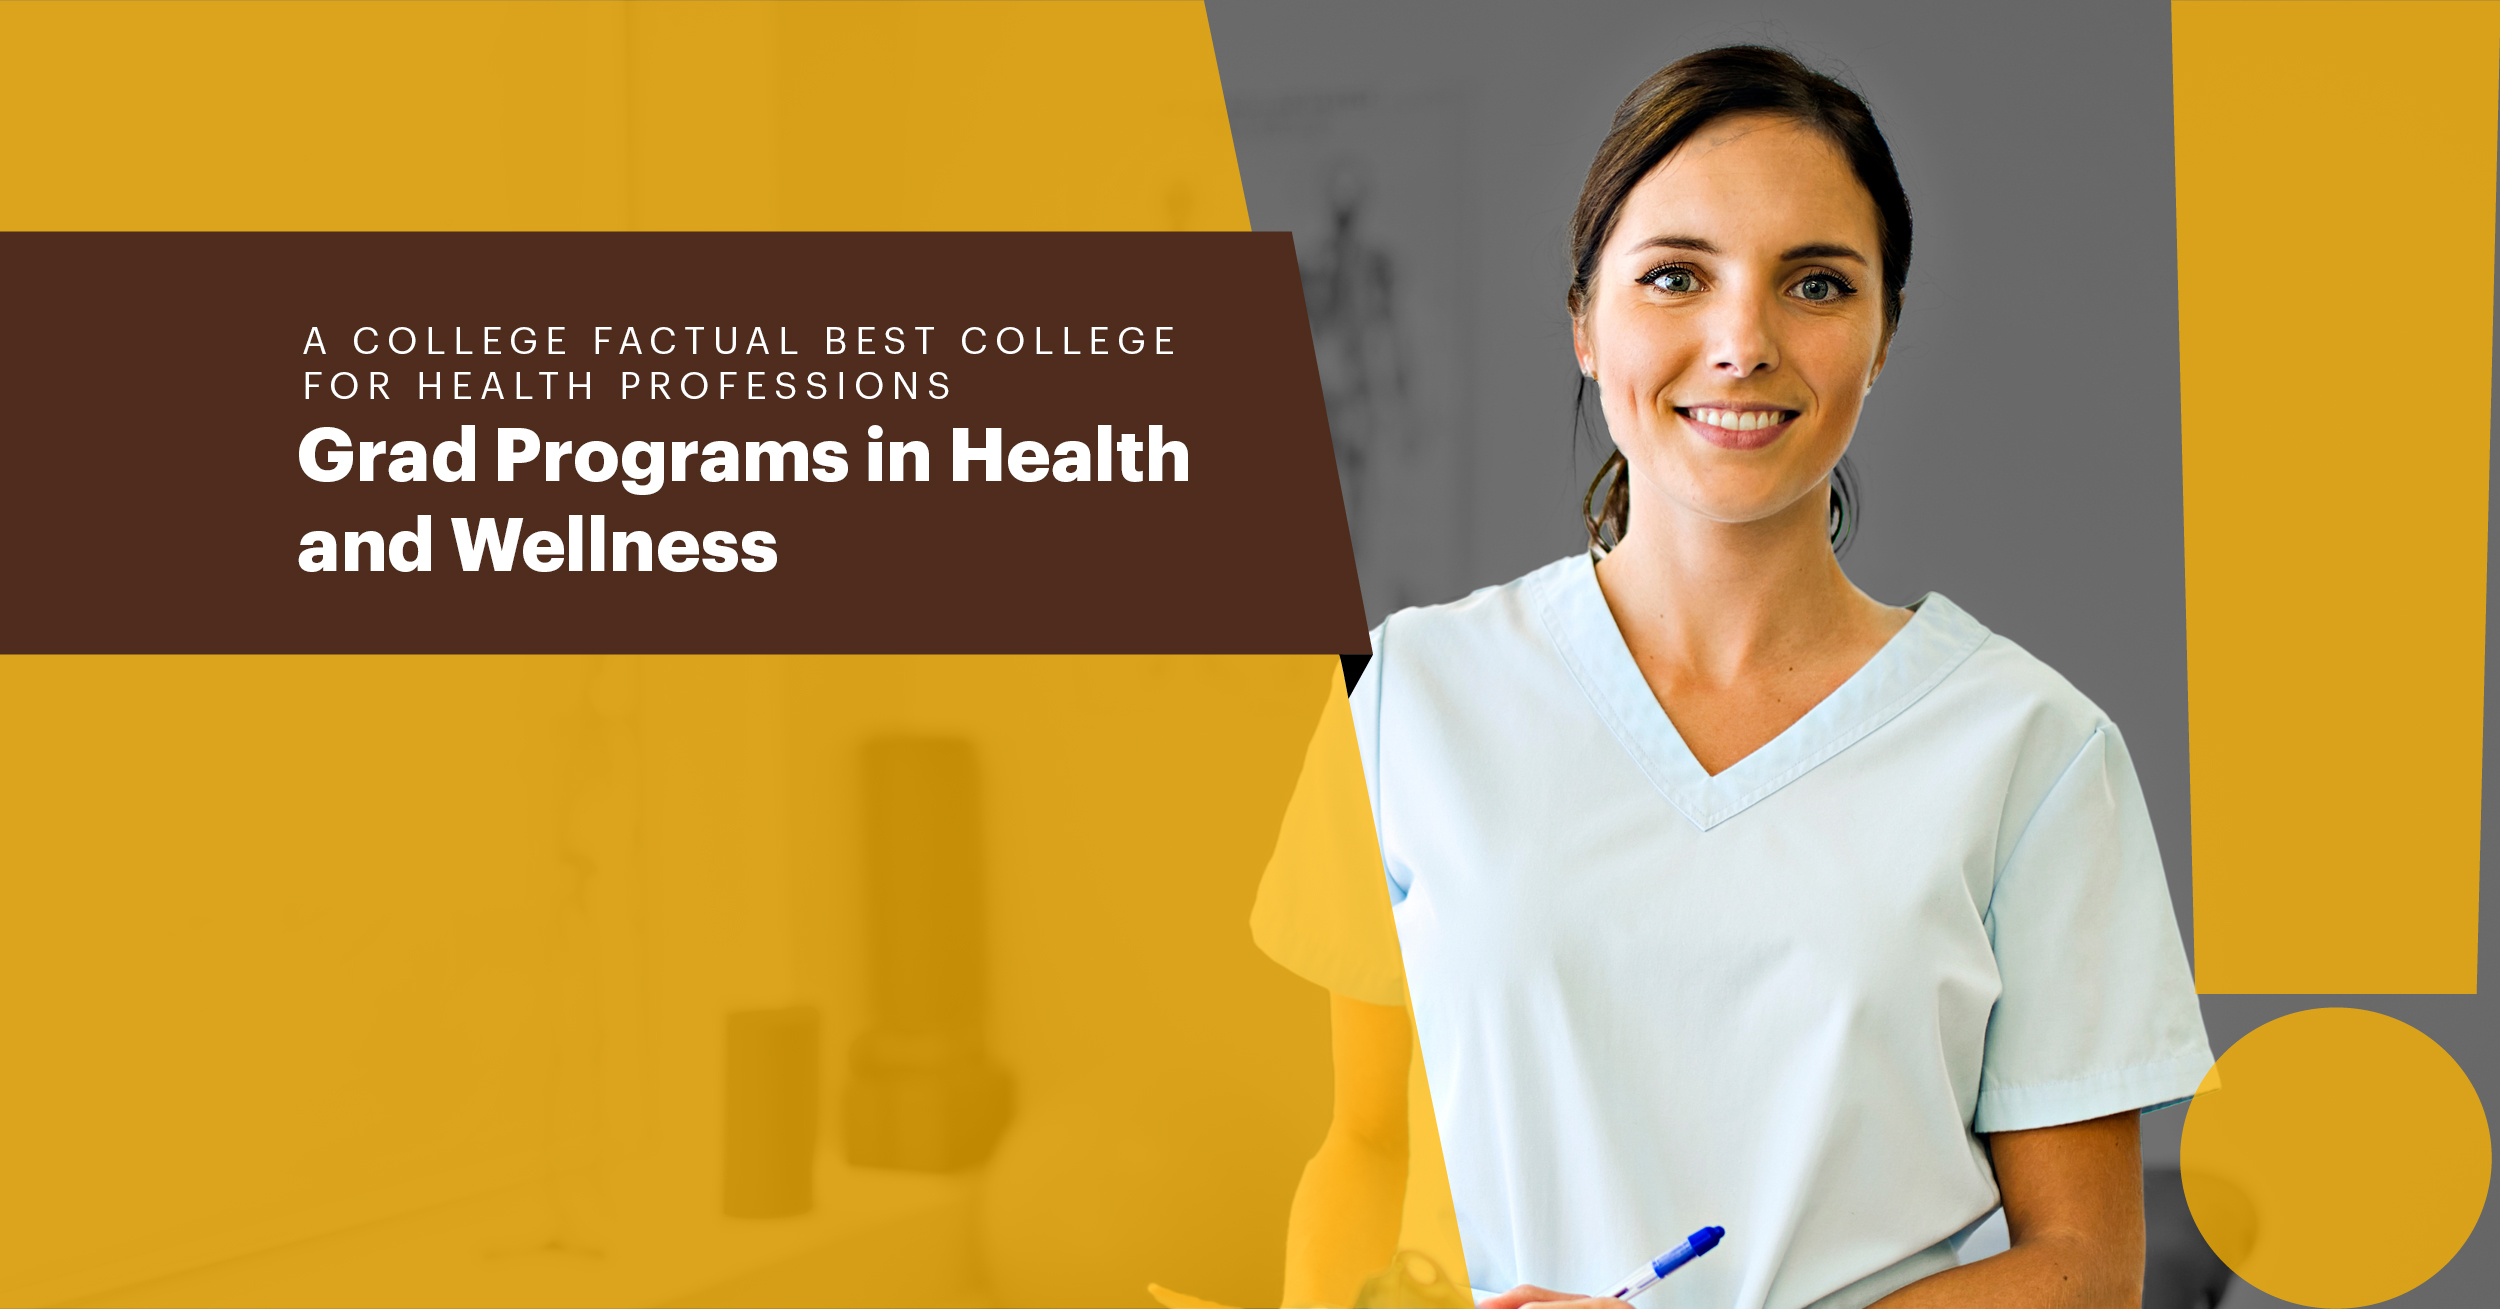 A College Factual Best College for Health Professions Grad Programs in Health & Wellness